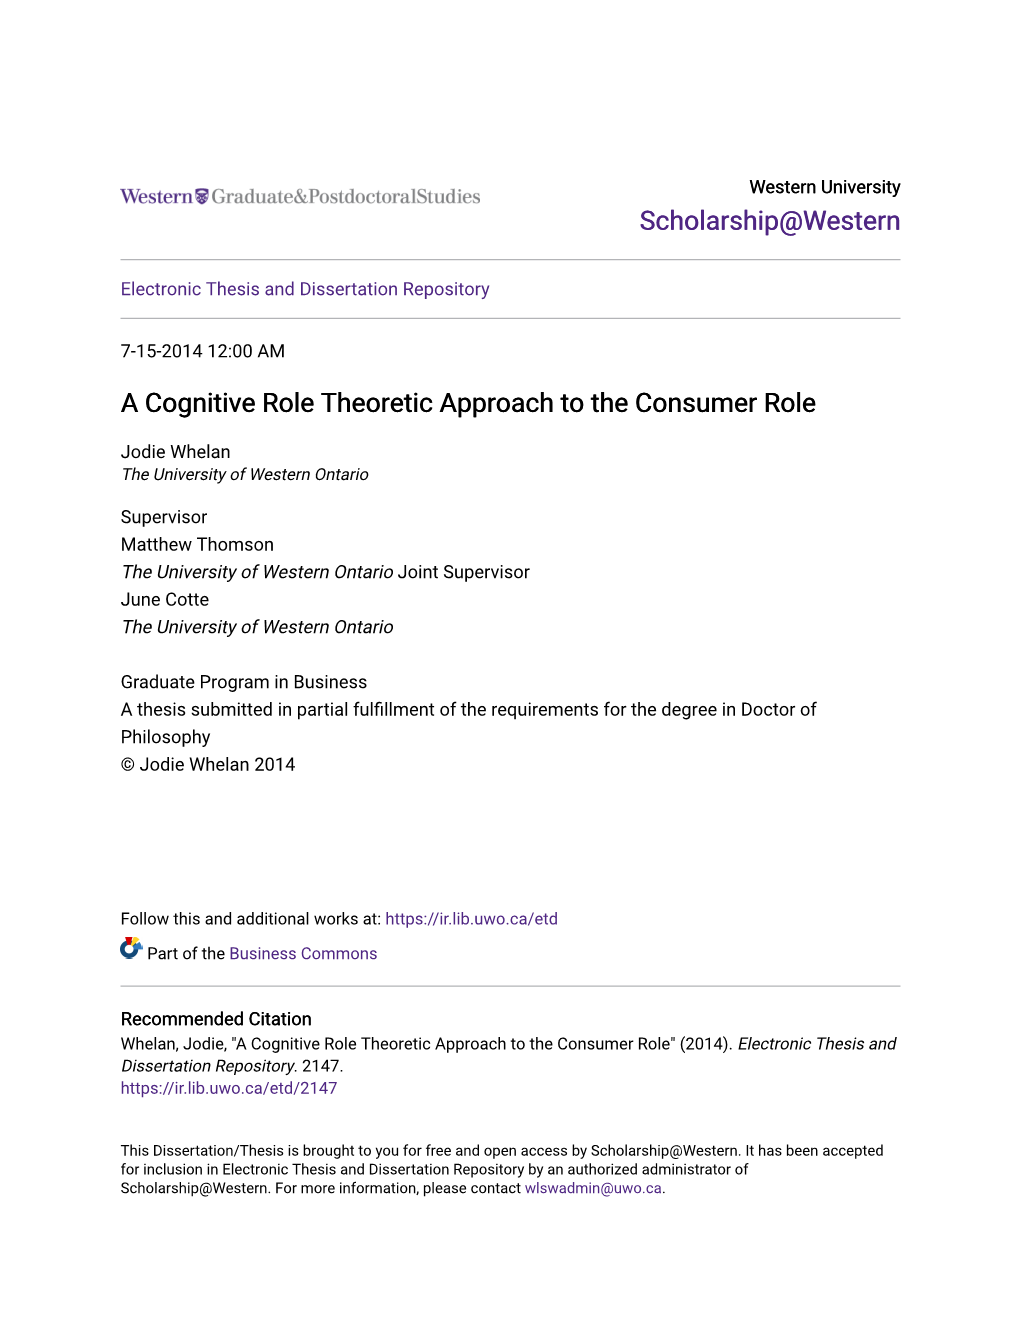 A Cognitive Role Theoretic Approach to the Consumer Role